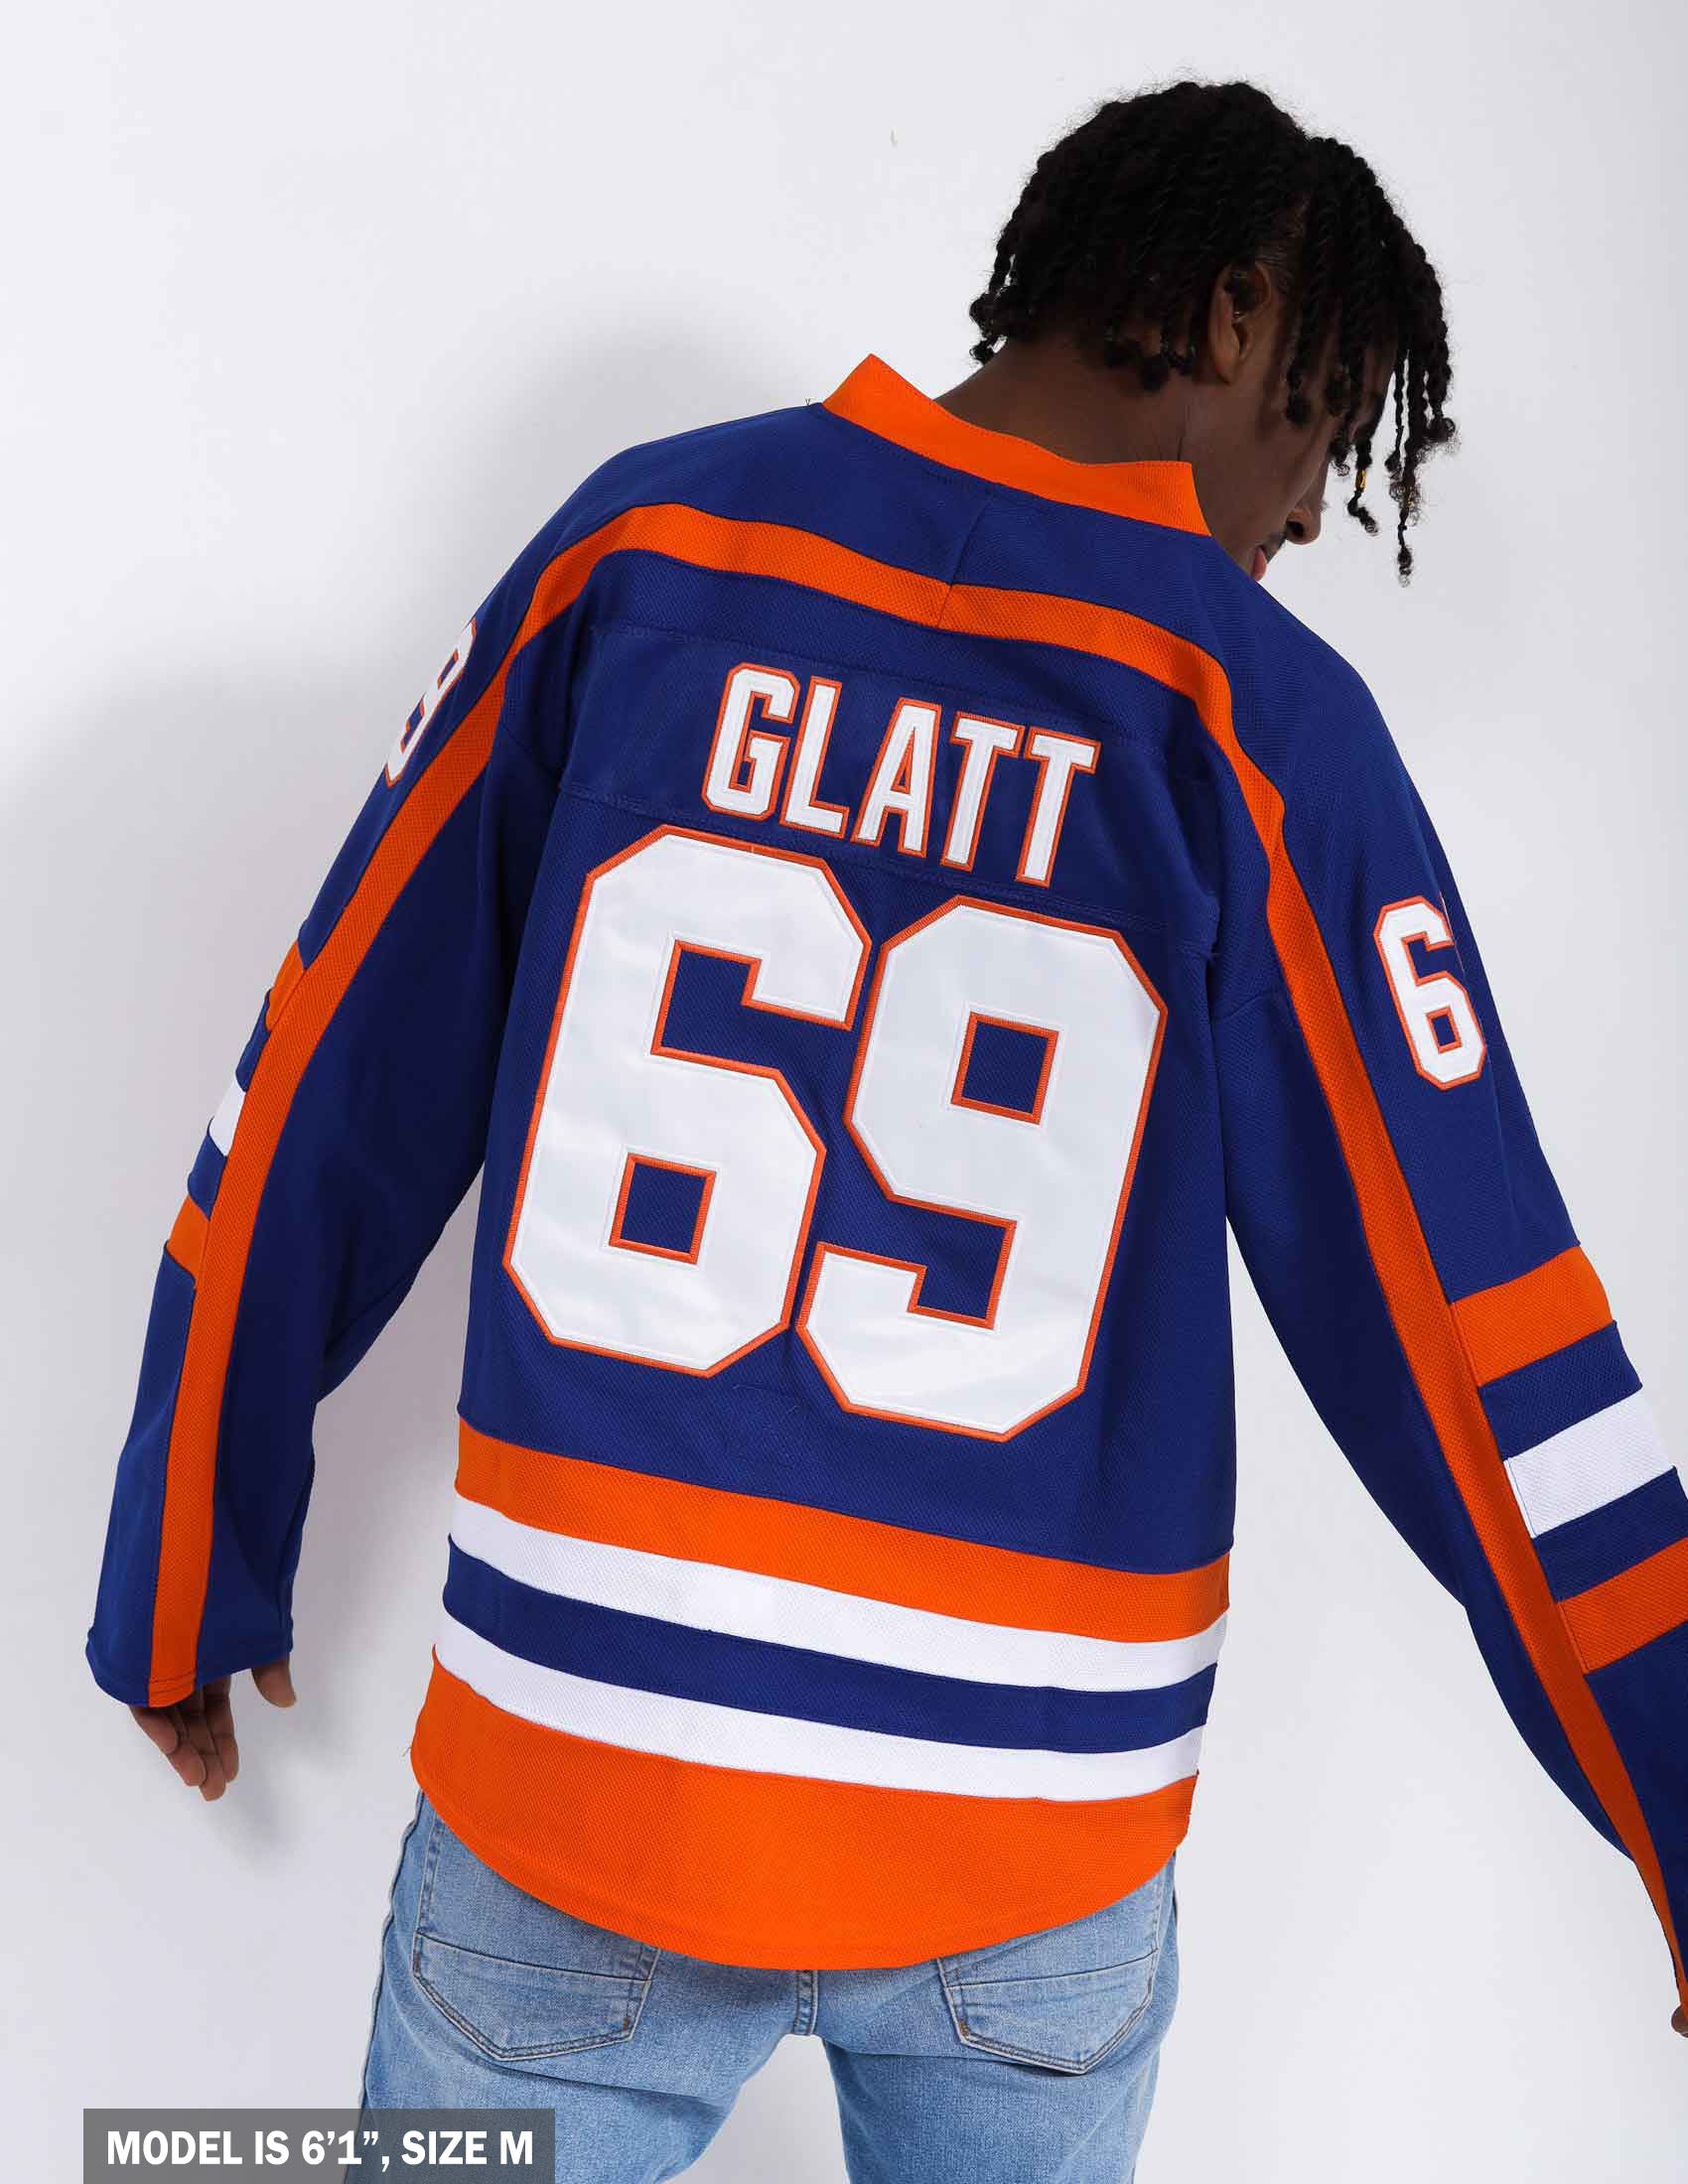 Youi-gifts Doug The Thug #69 Glatt Halifax Highlanders Ice Hockey Jersey Stitched Letters and Numbers S-xxxl, Adult Unisex, Blue